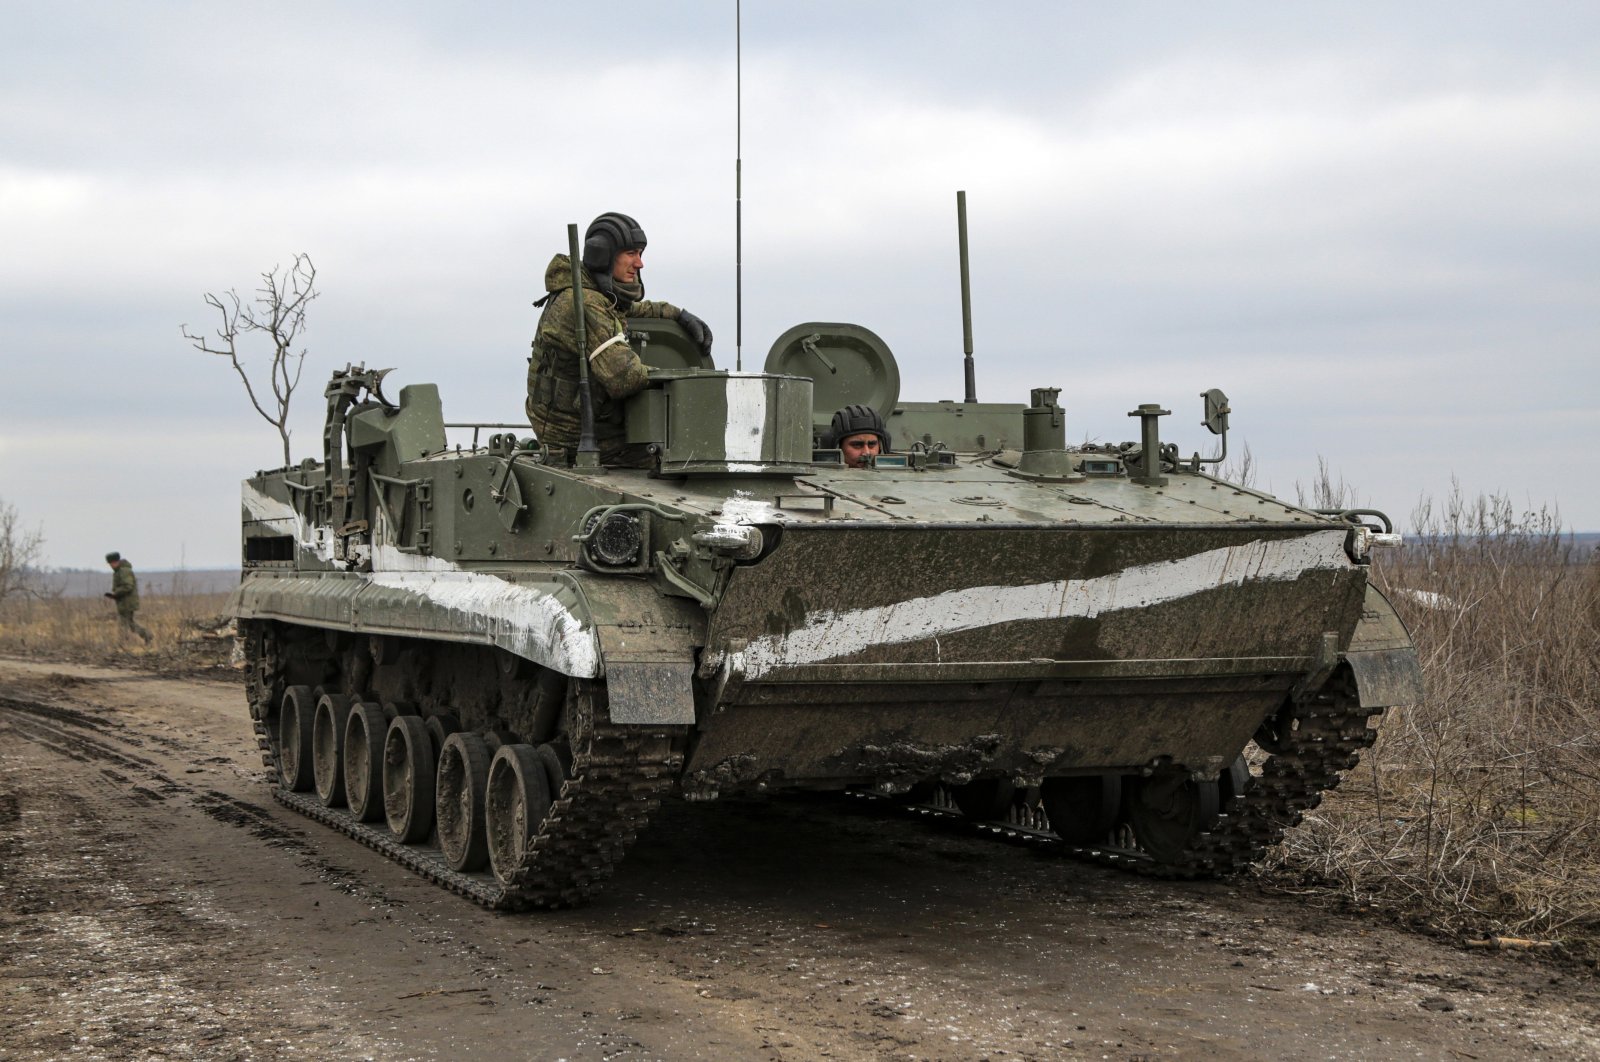 An armored vehicle rolls outside Mykolaivka, Donetsk region, the territory controlled by pro-Russian militants, eastern Ukraine, Feb. 27, 2022. (AP Photo)